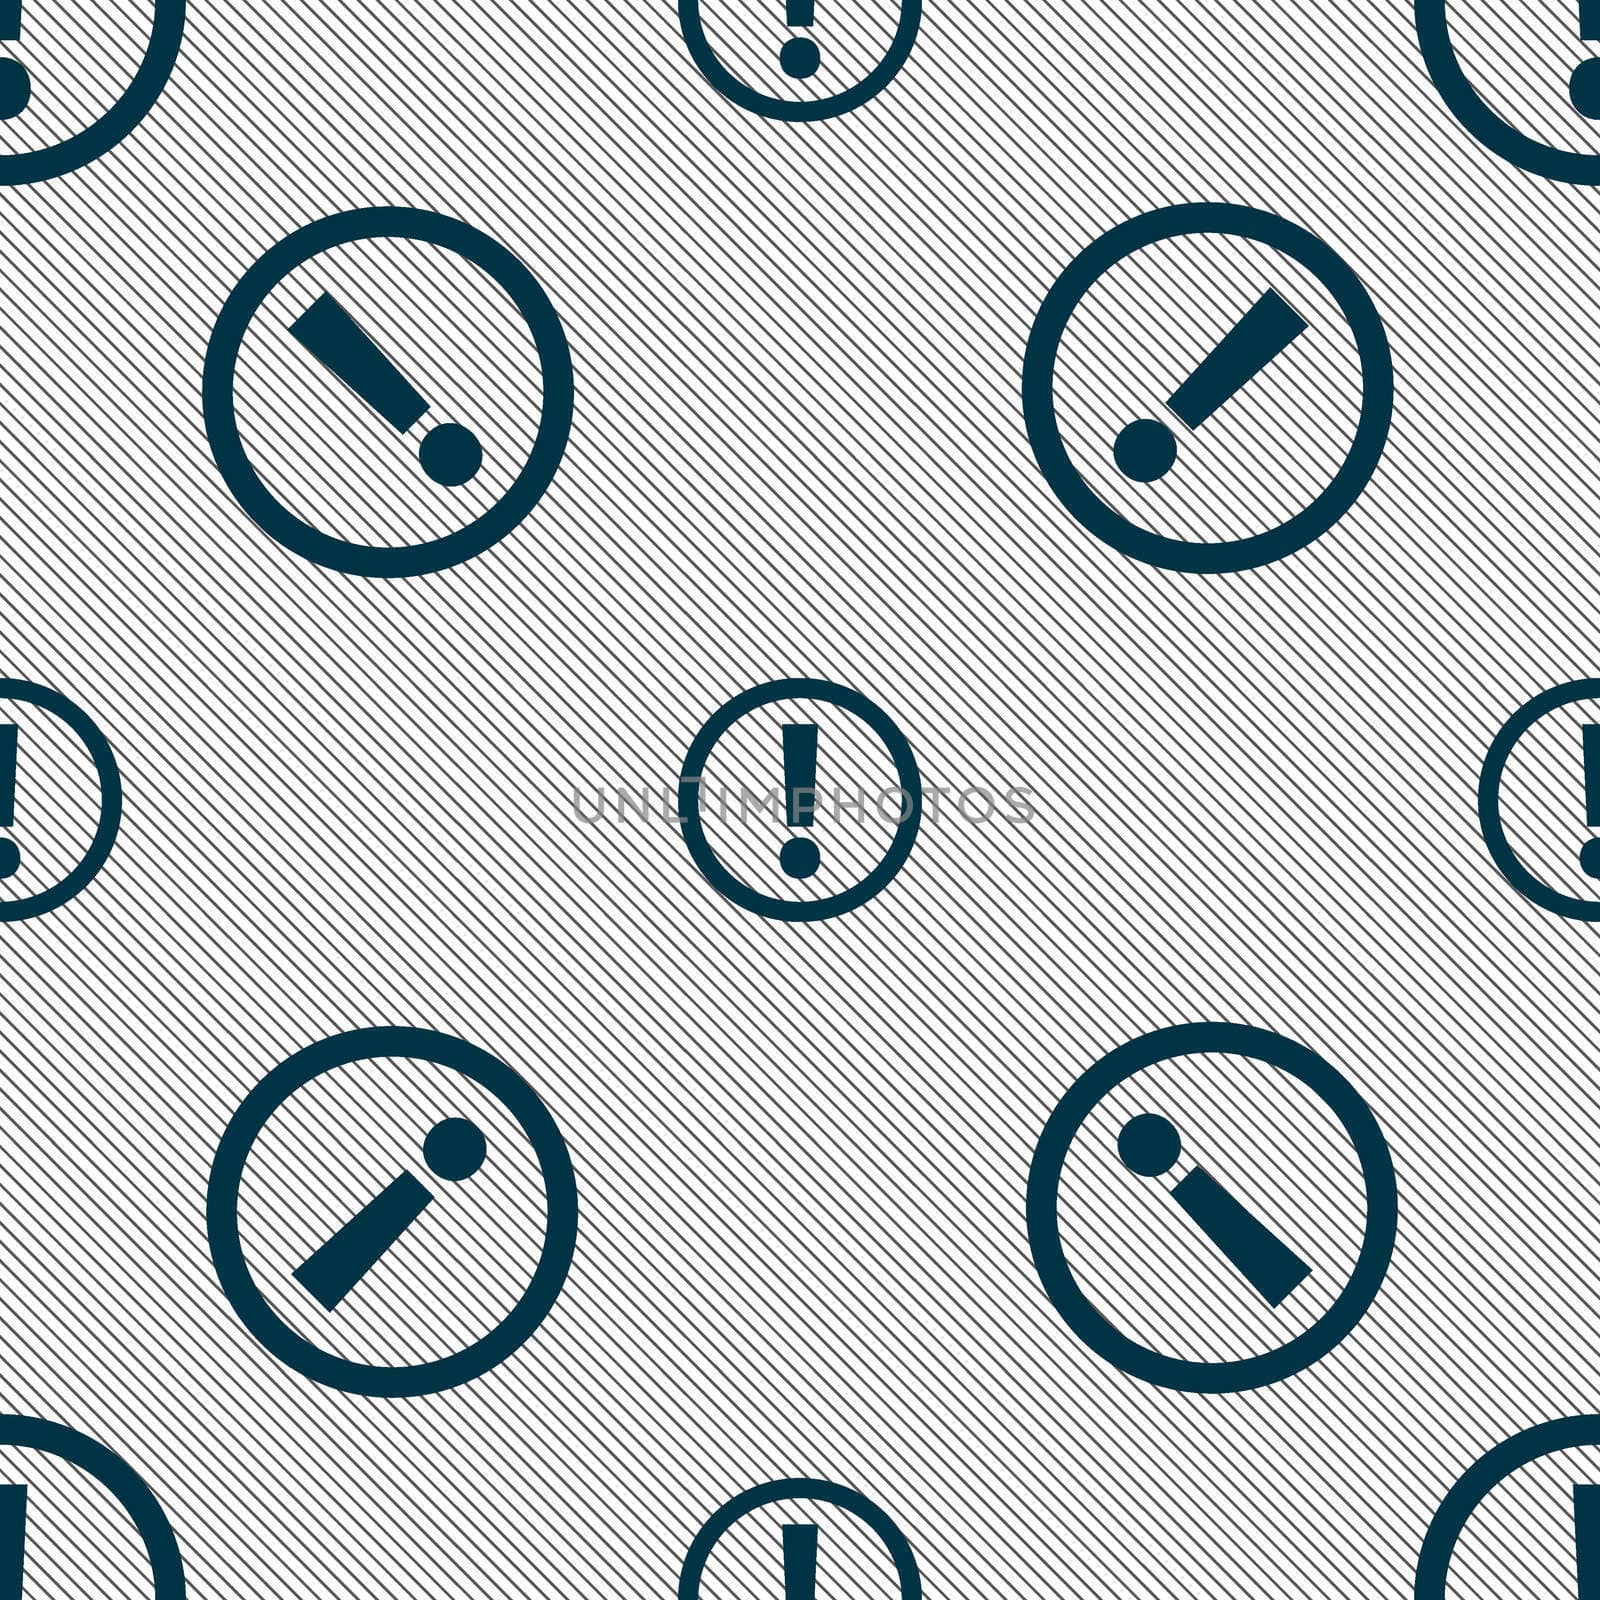 Attention sign icon. Exclamation mark. Hazard warning symbol. Seamless pattern with geometric texture. illustration